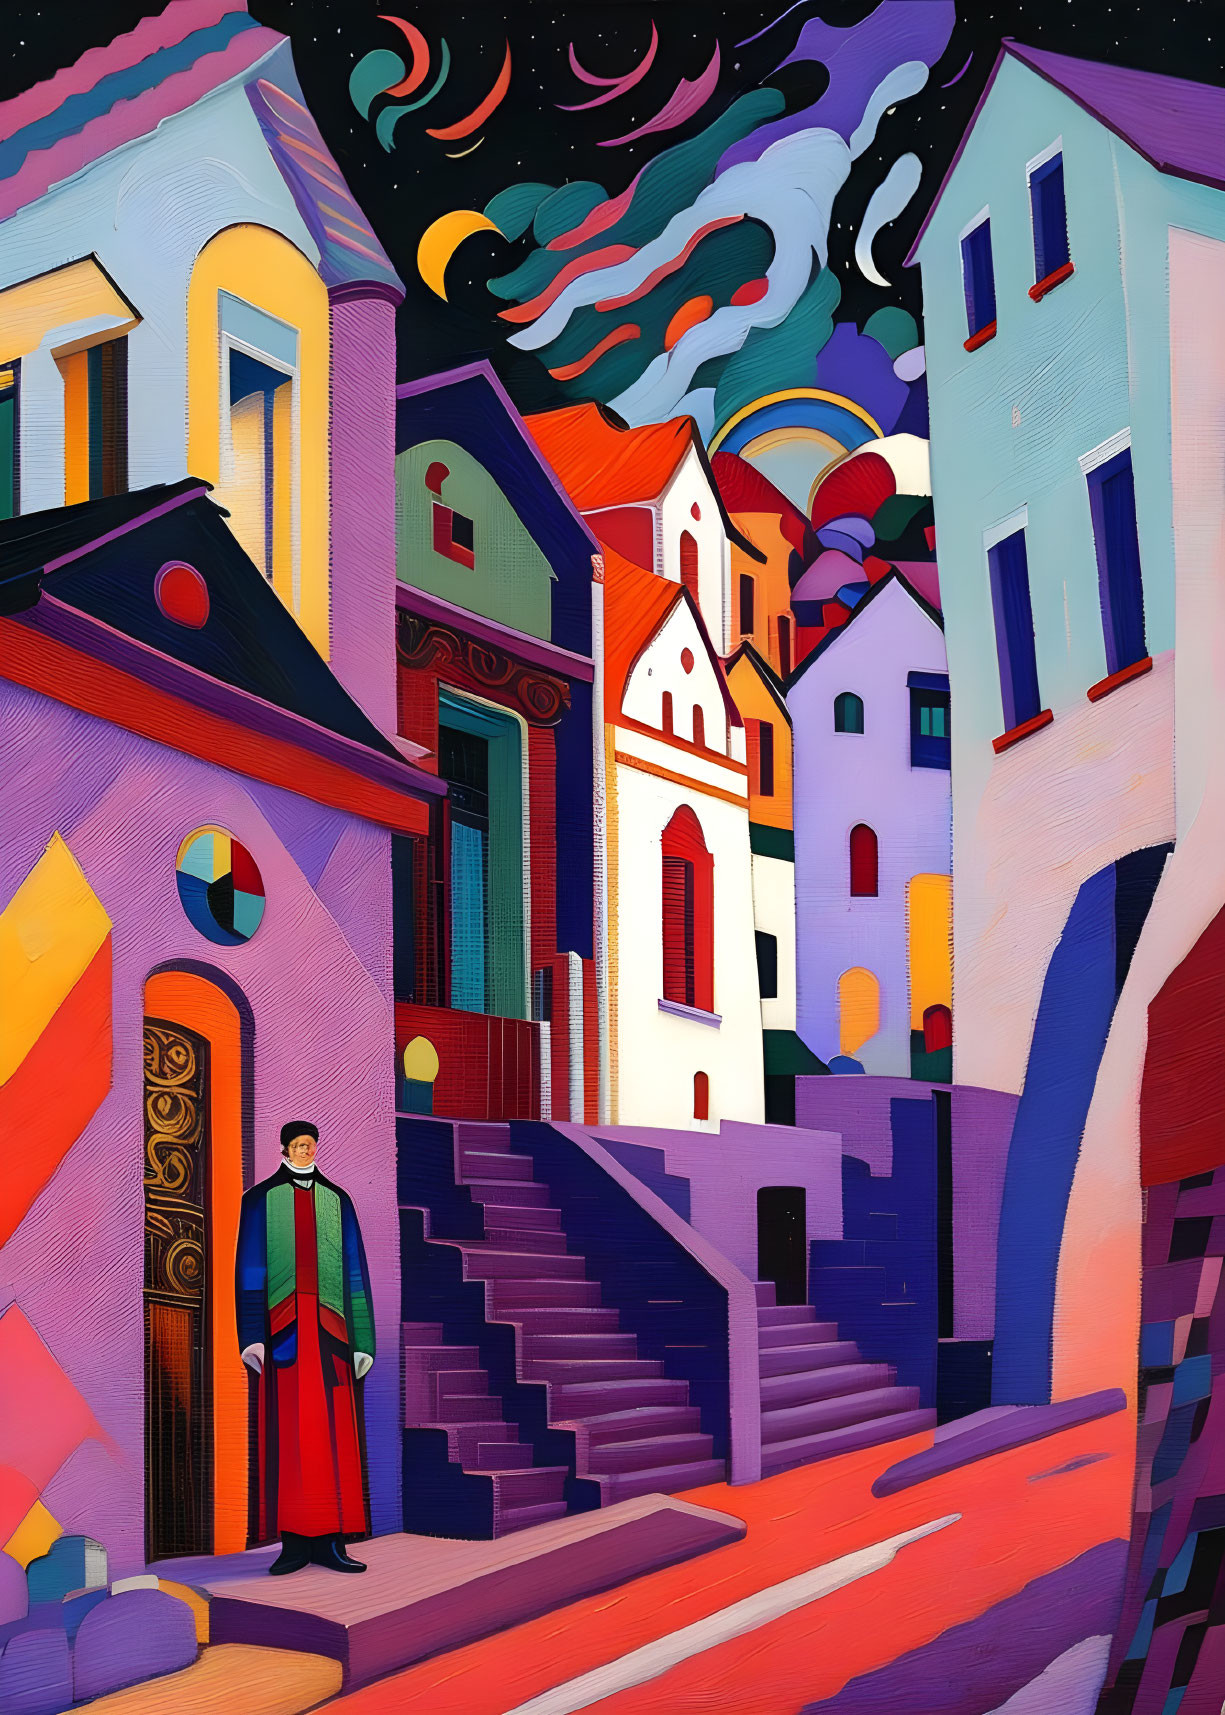 Colorful, stylized artwork of person in green coat and red scarf amidst whimsical buildings